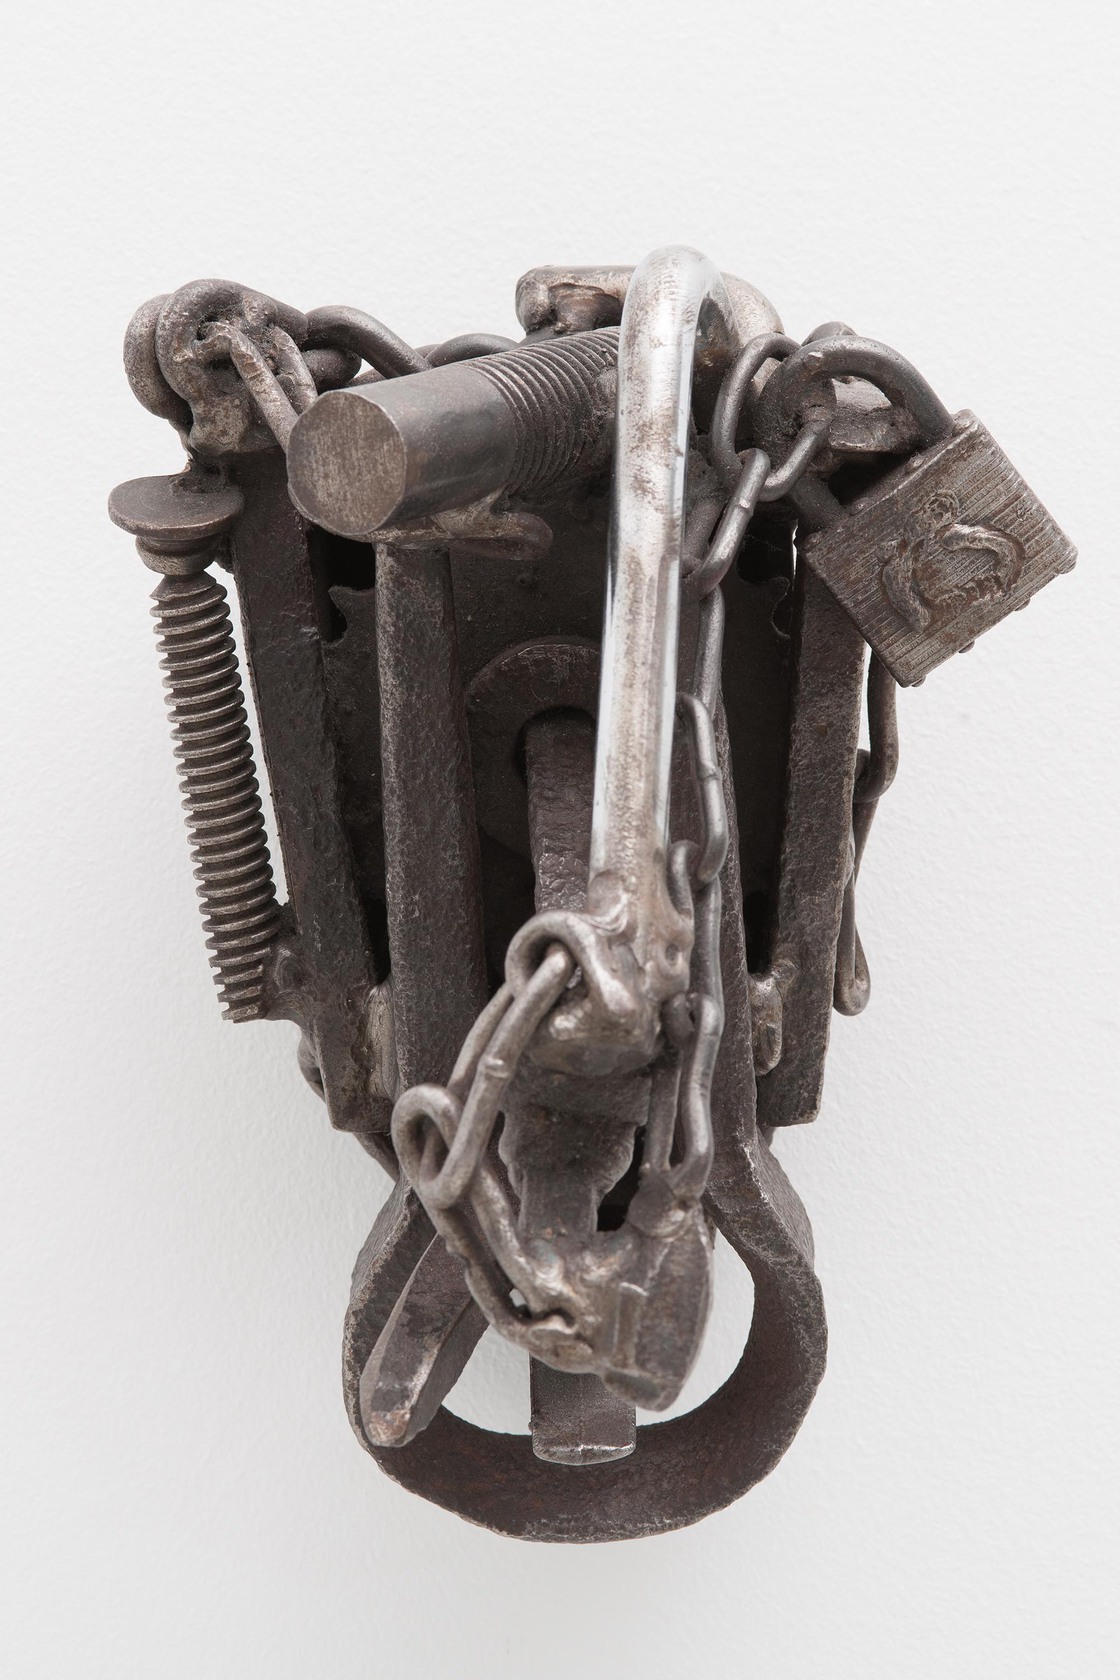 Melvin Edwards, Justice for Tropic-Ana (dedicated to Ana Mendieta), 1986, Carnegie Museum of Art,